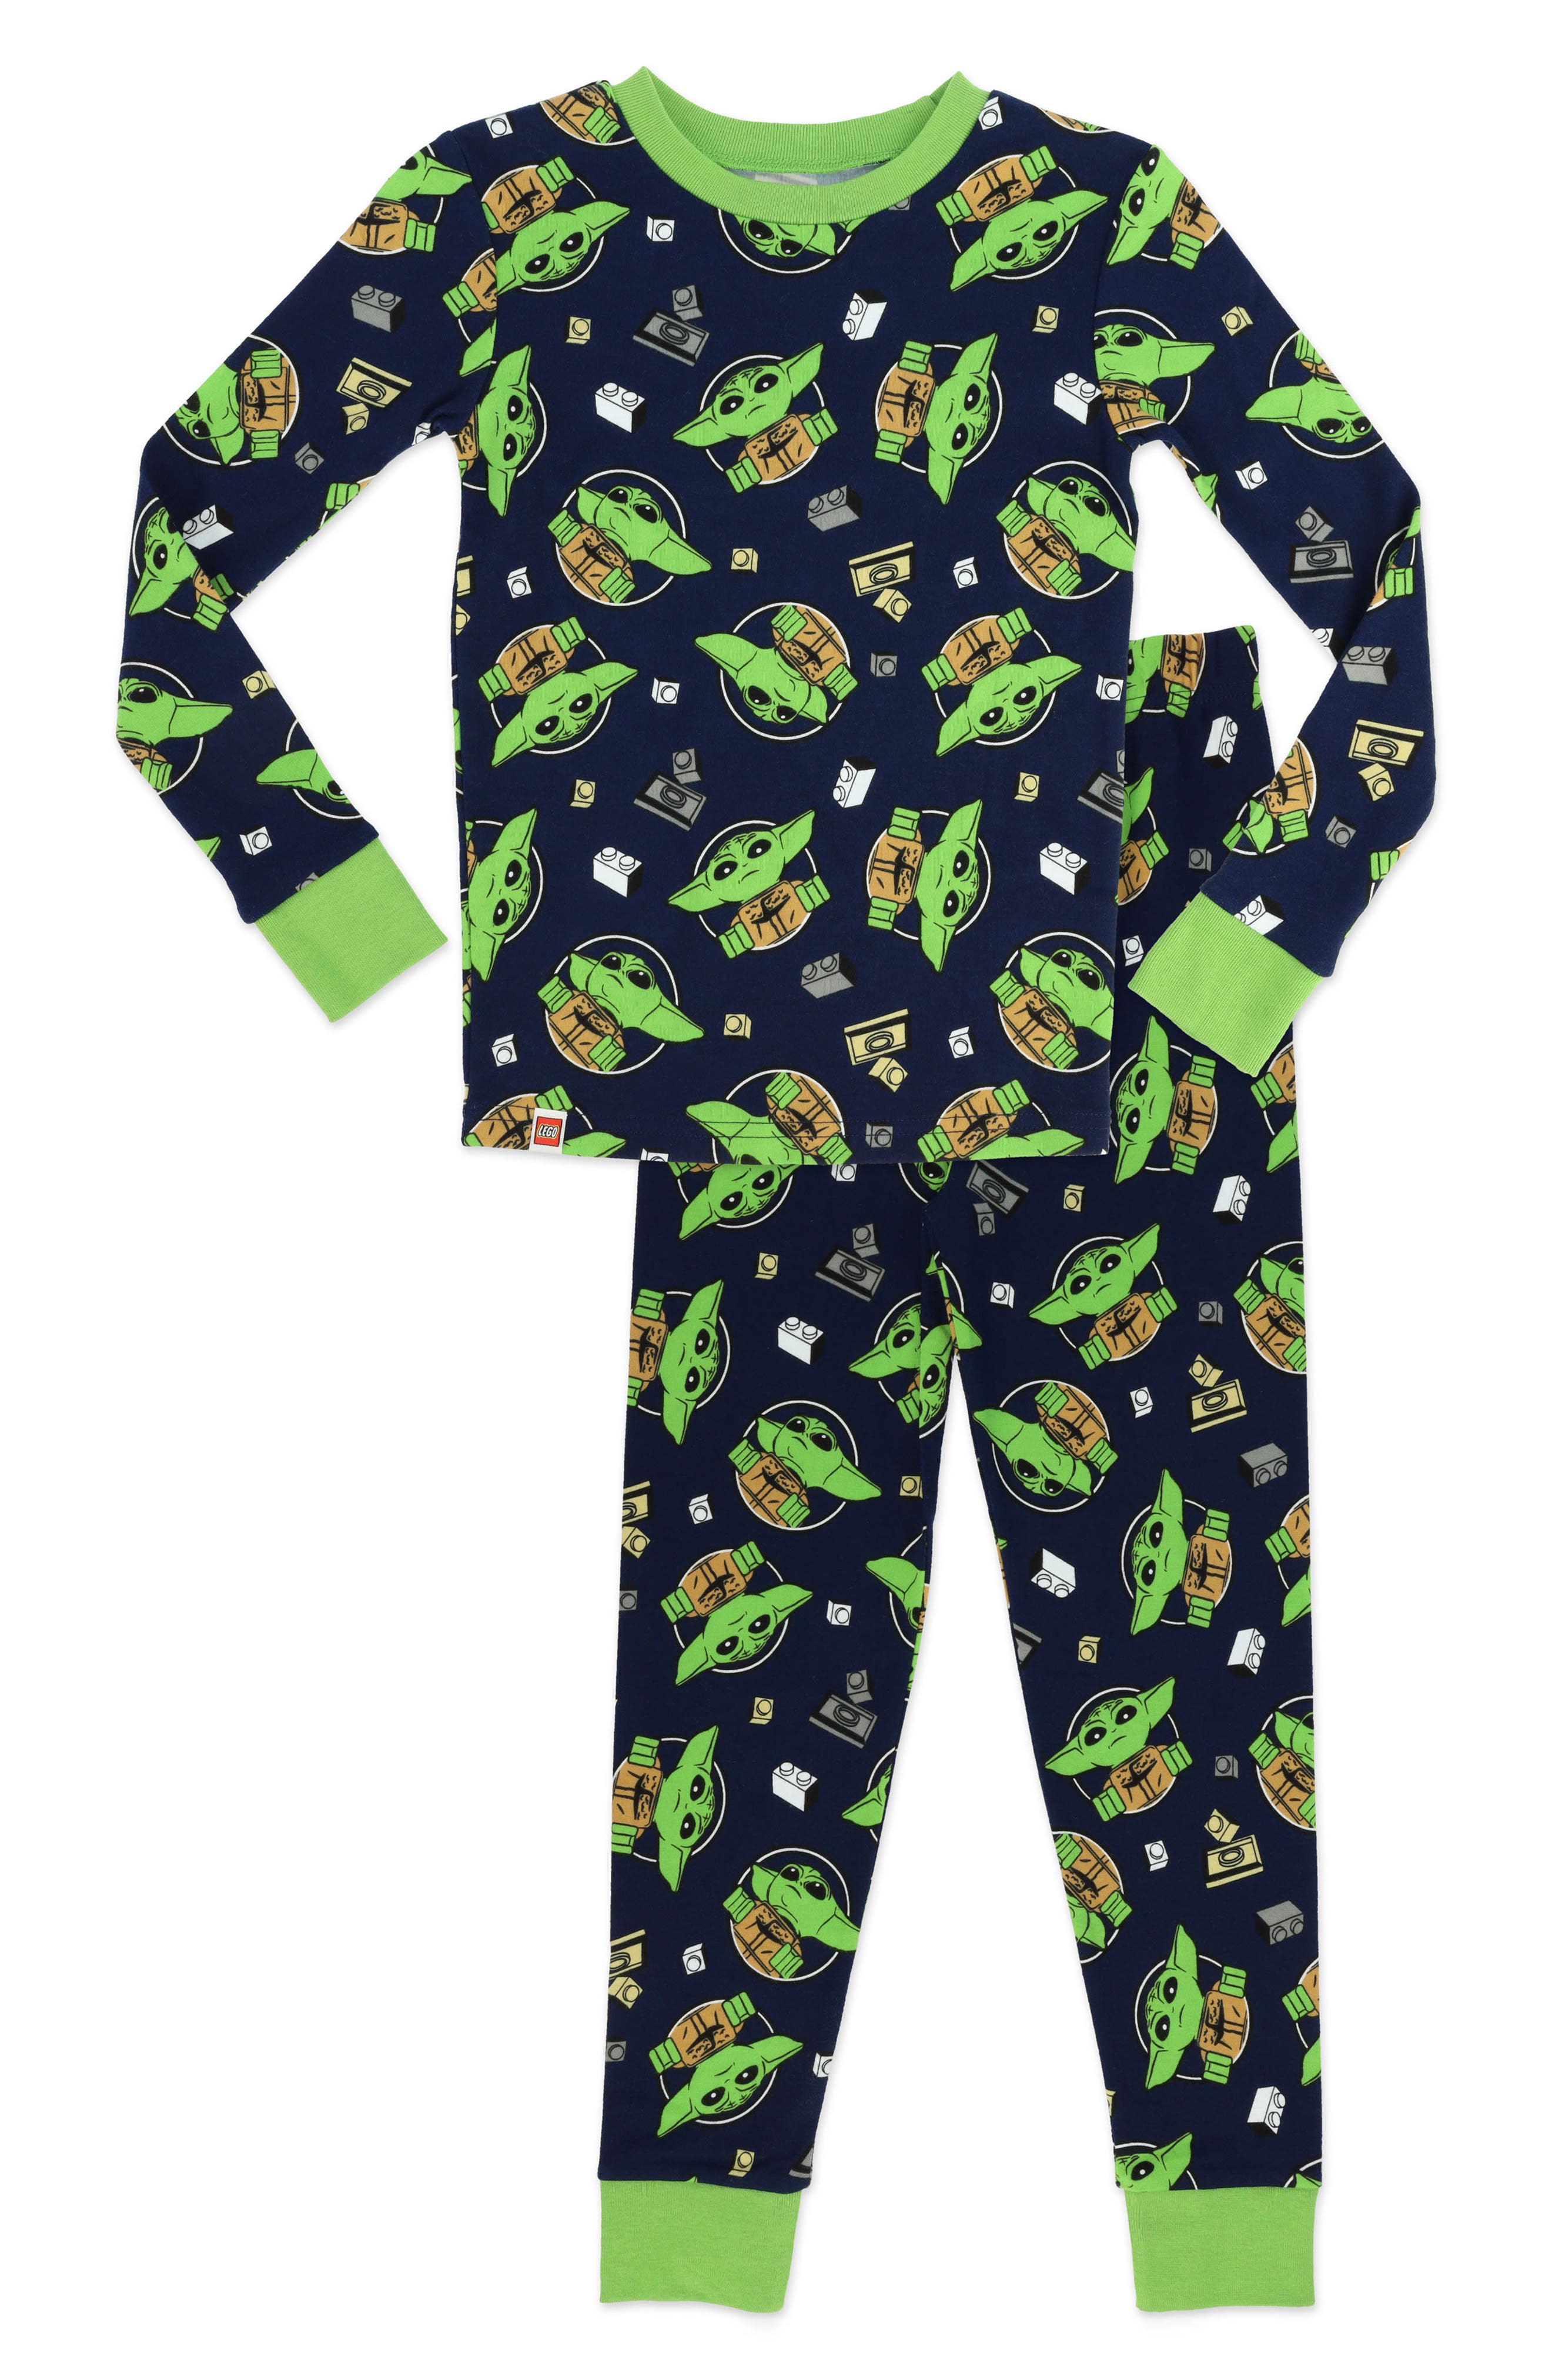 Nordstrom Baby Clothing Loungewear Pajamas King of the Jungle Fitted Footie Pajamas in Blue at Nordstrom 